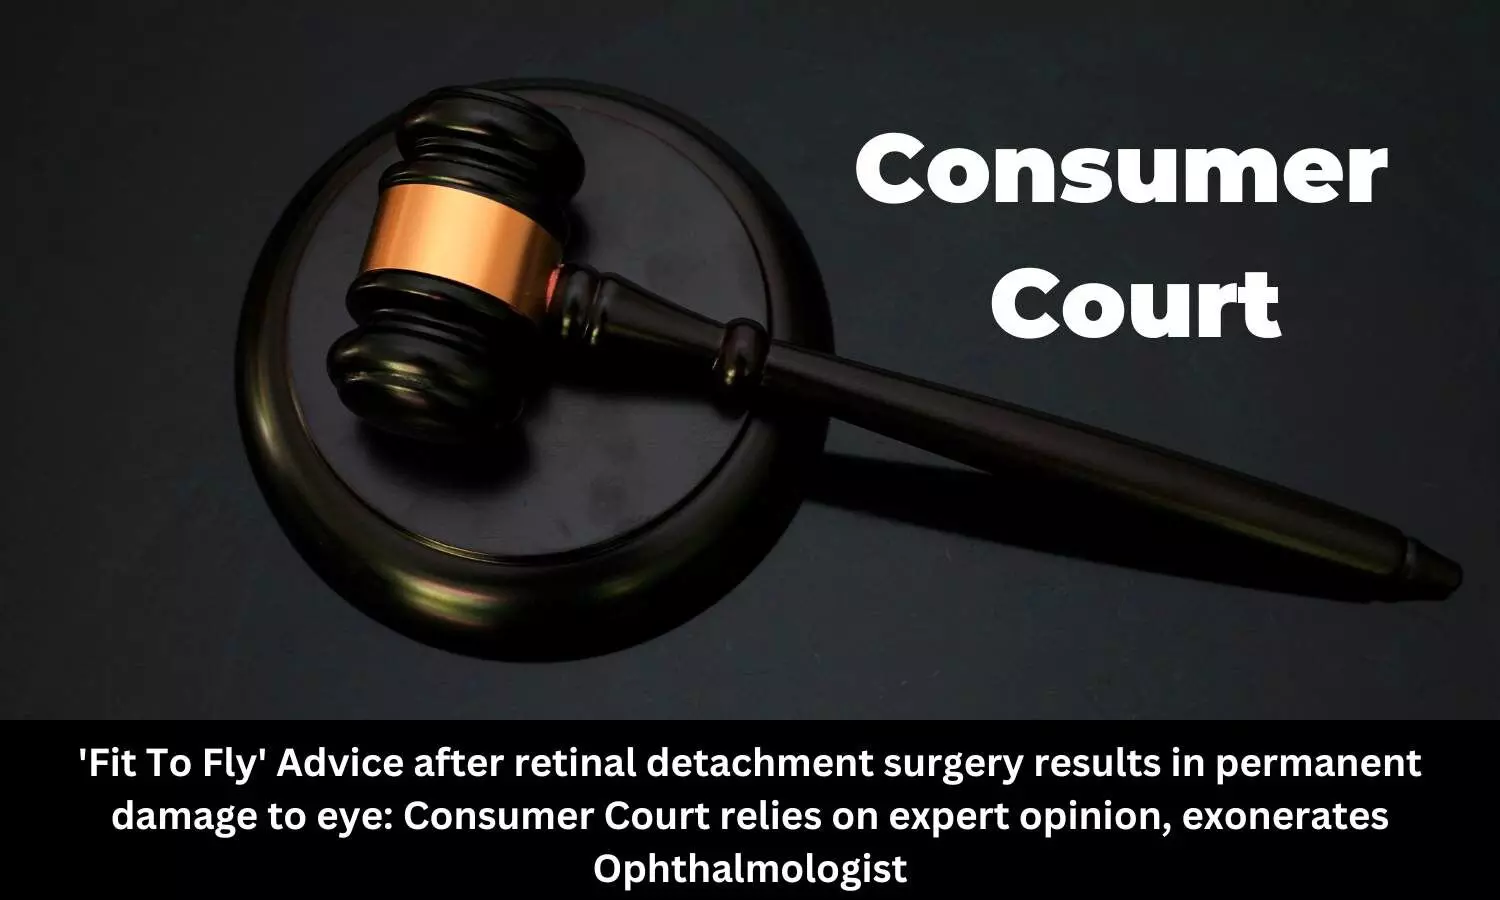 Fit To Fly advice after retinal detachment surgery results in permanent damage to eye: NCDRC exonerates Kolkata based hospital, eye surgeon from charges of medical negligence